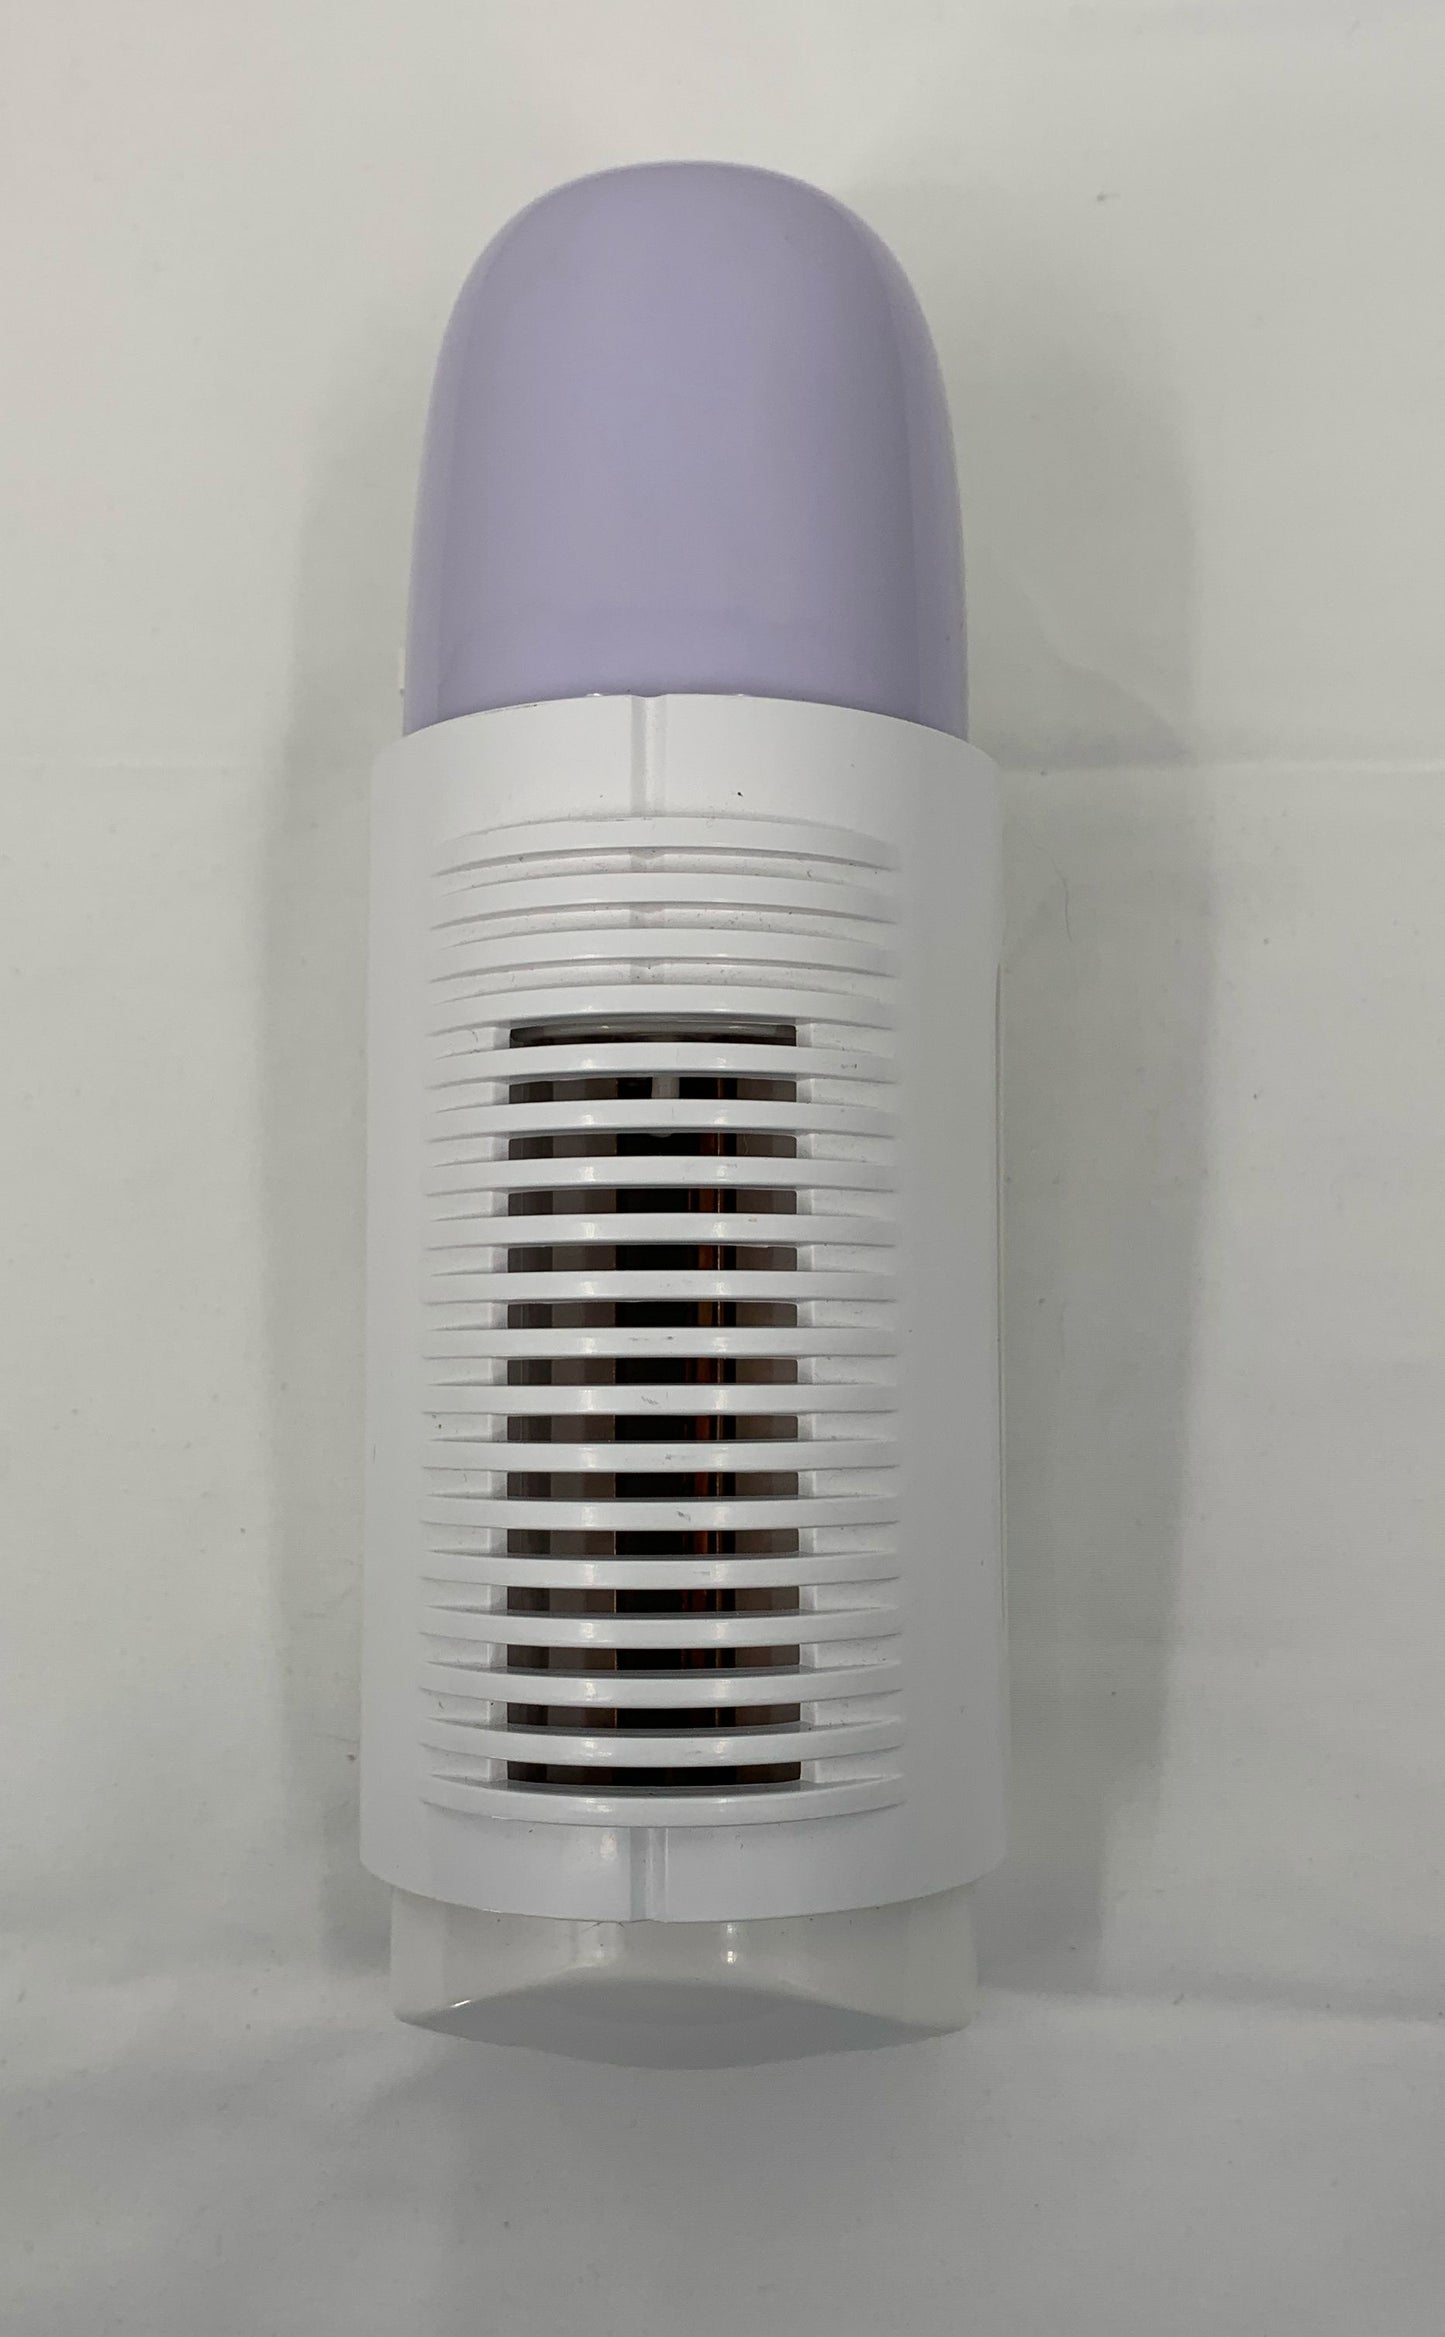 Air Police Compact Bulbhead Wall Outlet Air Purifier With IONIC Technology A301